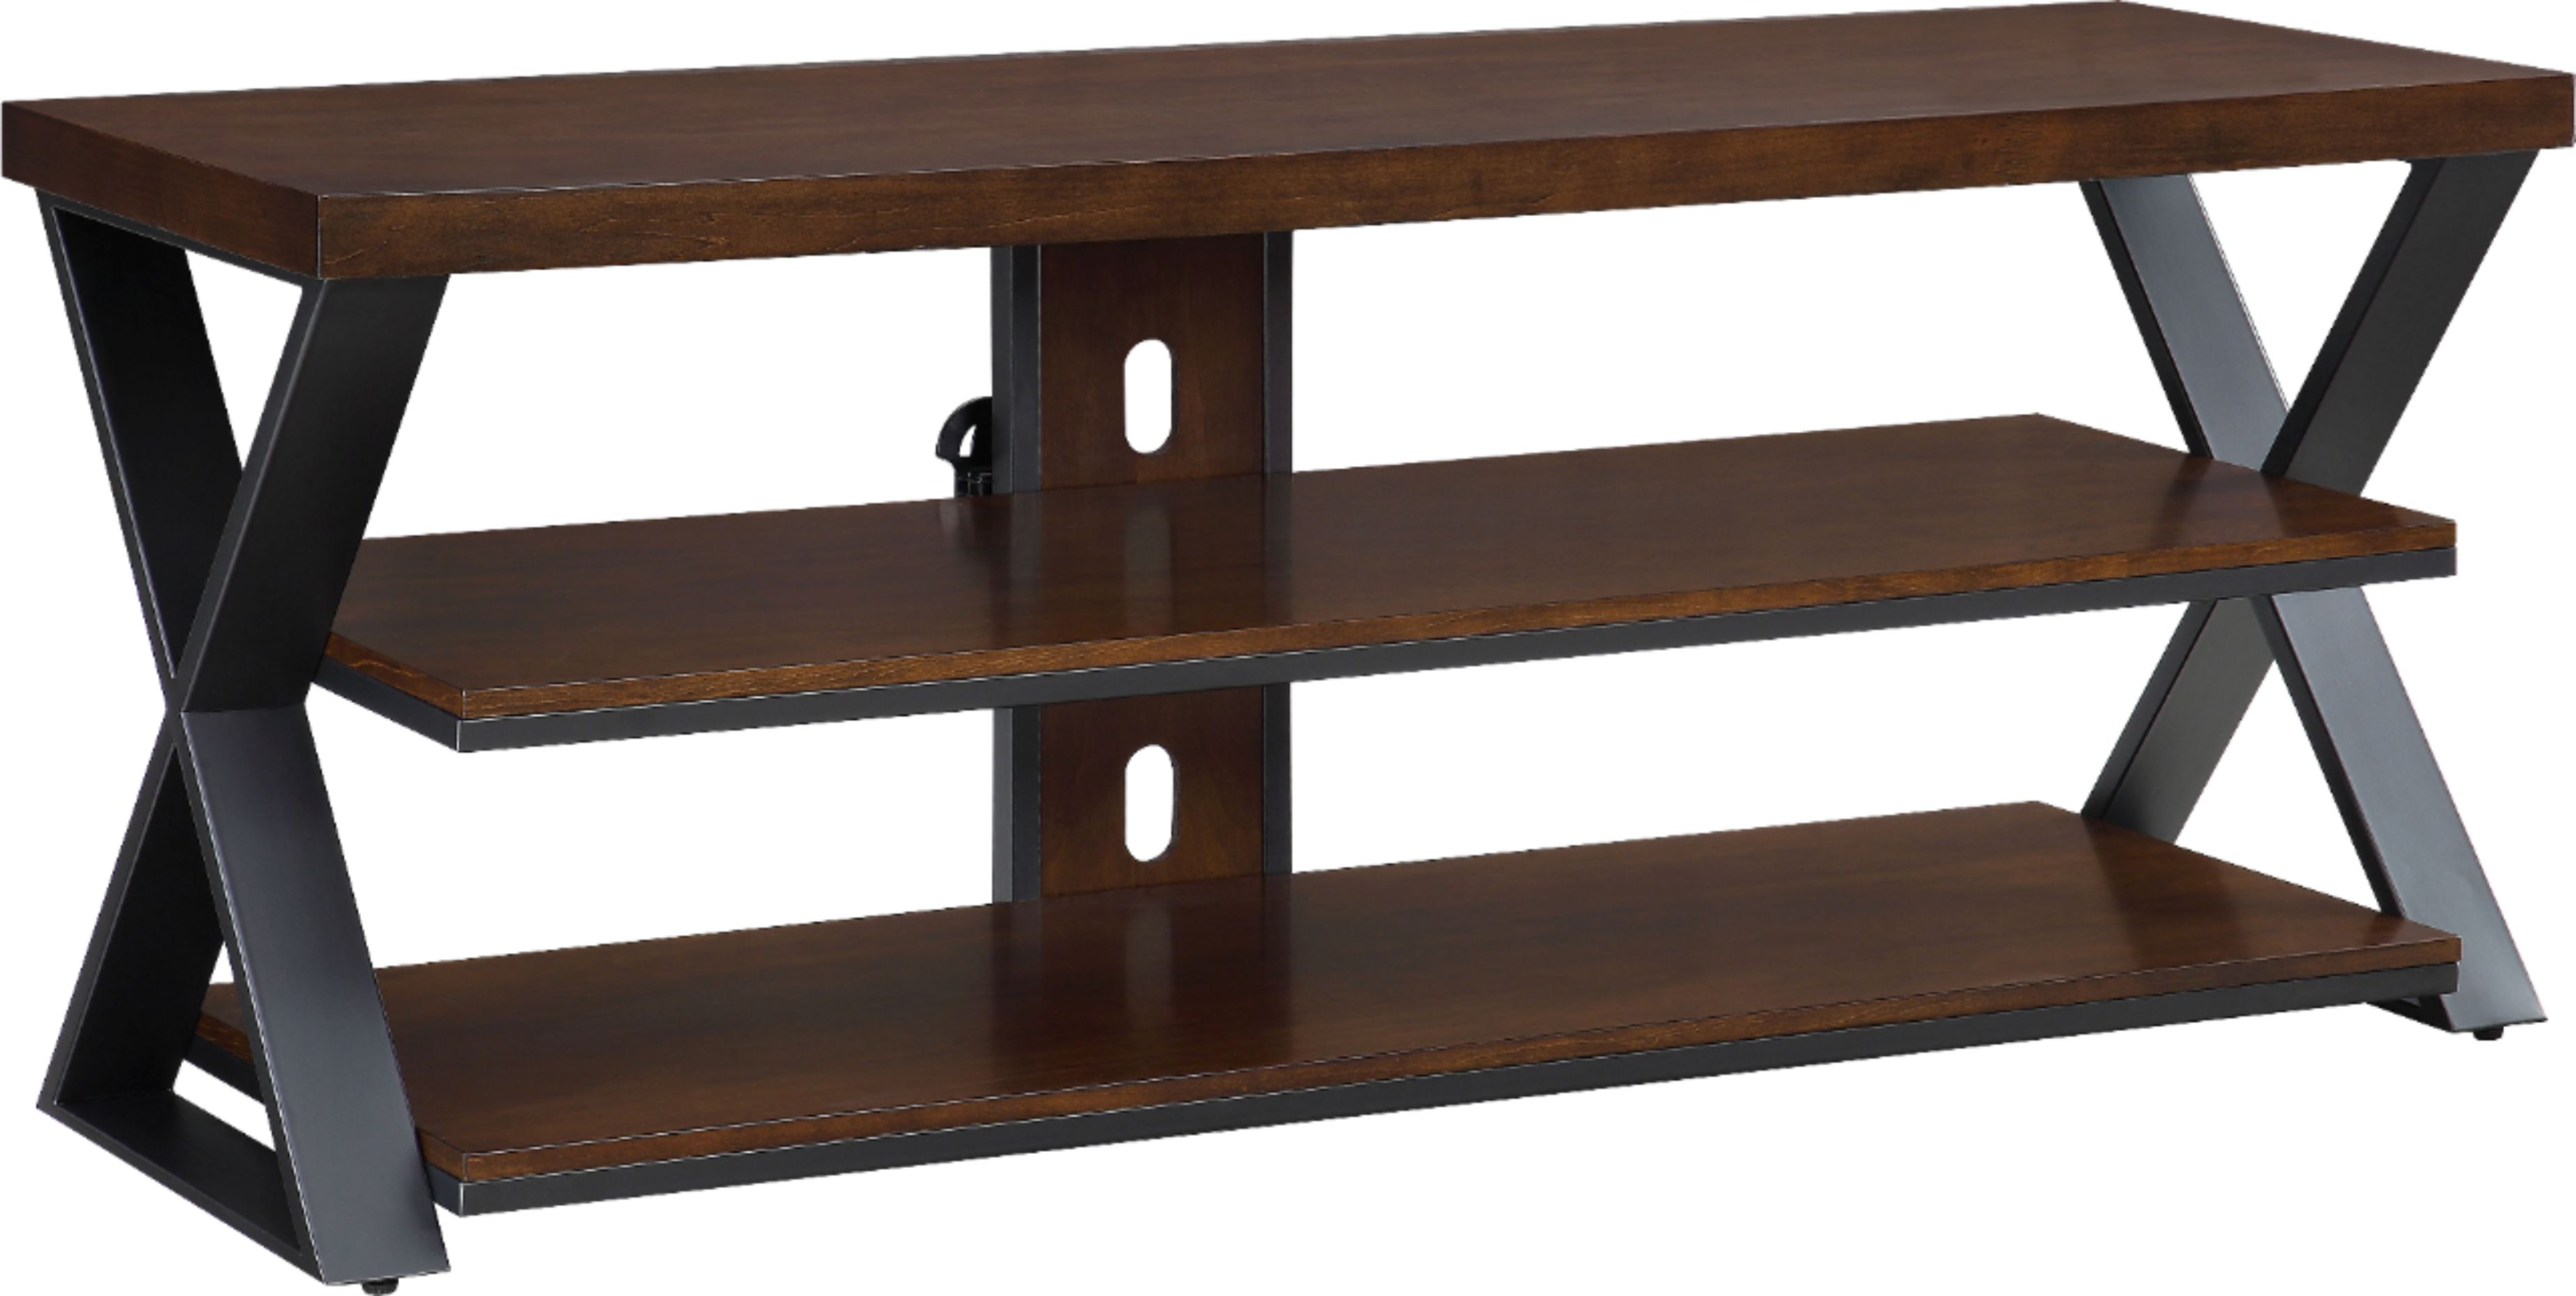 Left View: CorLiving - Jackson Wooden Extra Wide TV Stand, for TVs up to 85" - Black Wood Grain